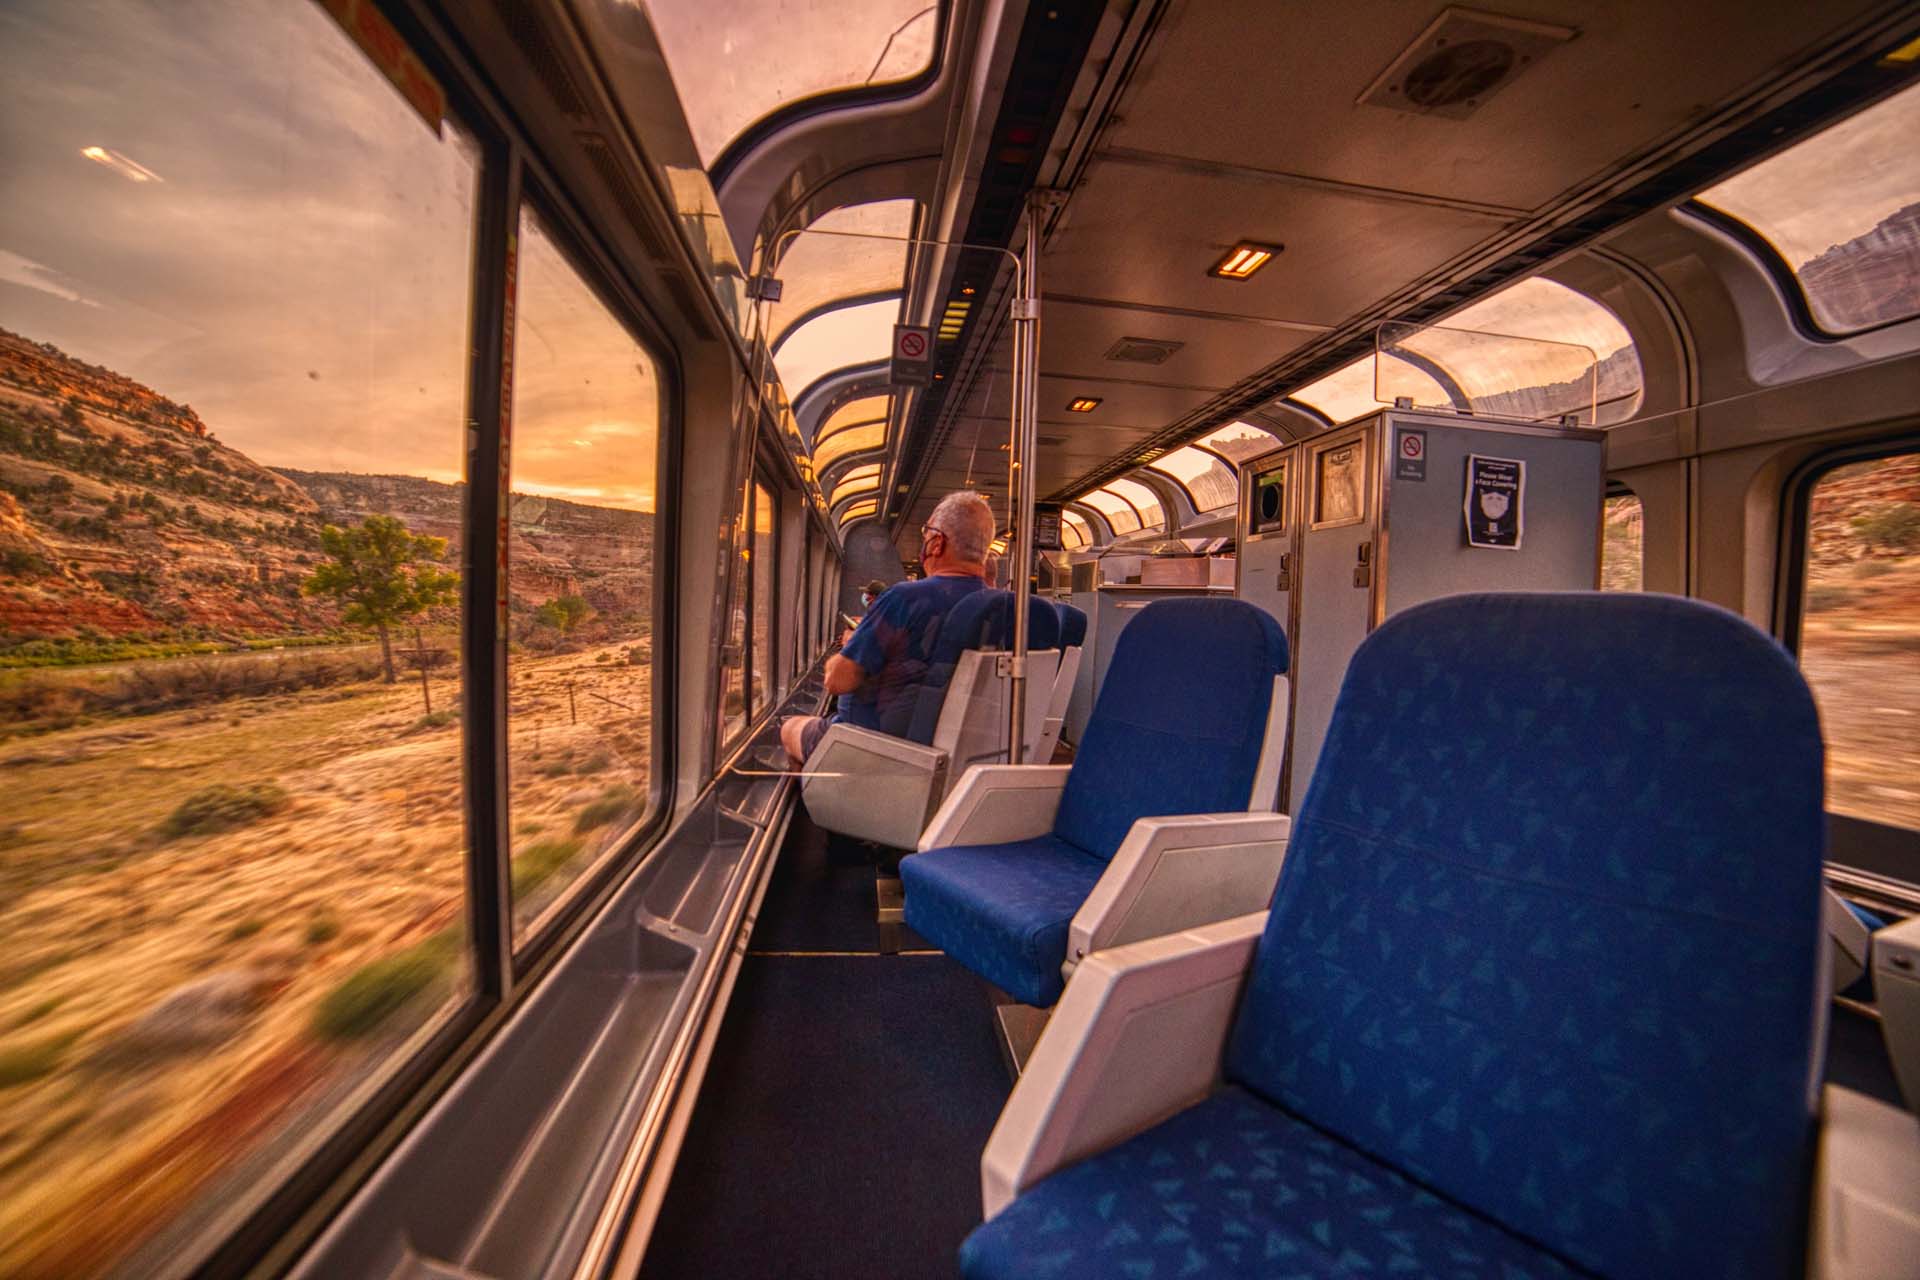 A passenger sitting in a lounge on a train with panoramic glass windows taking in desert views in Colorado, USA